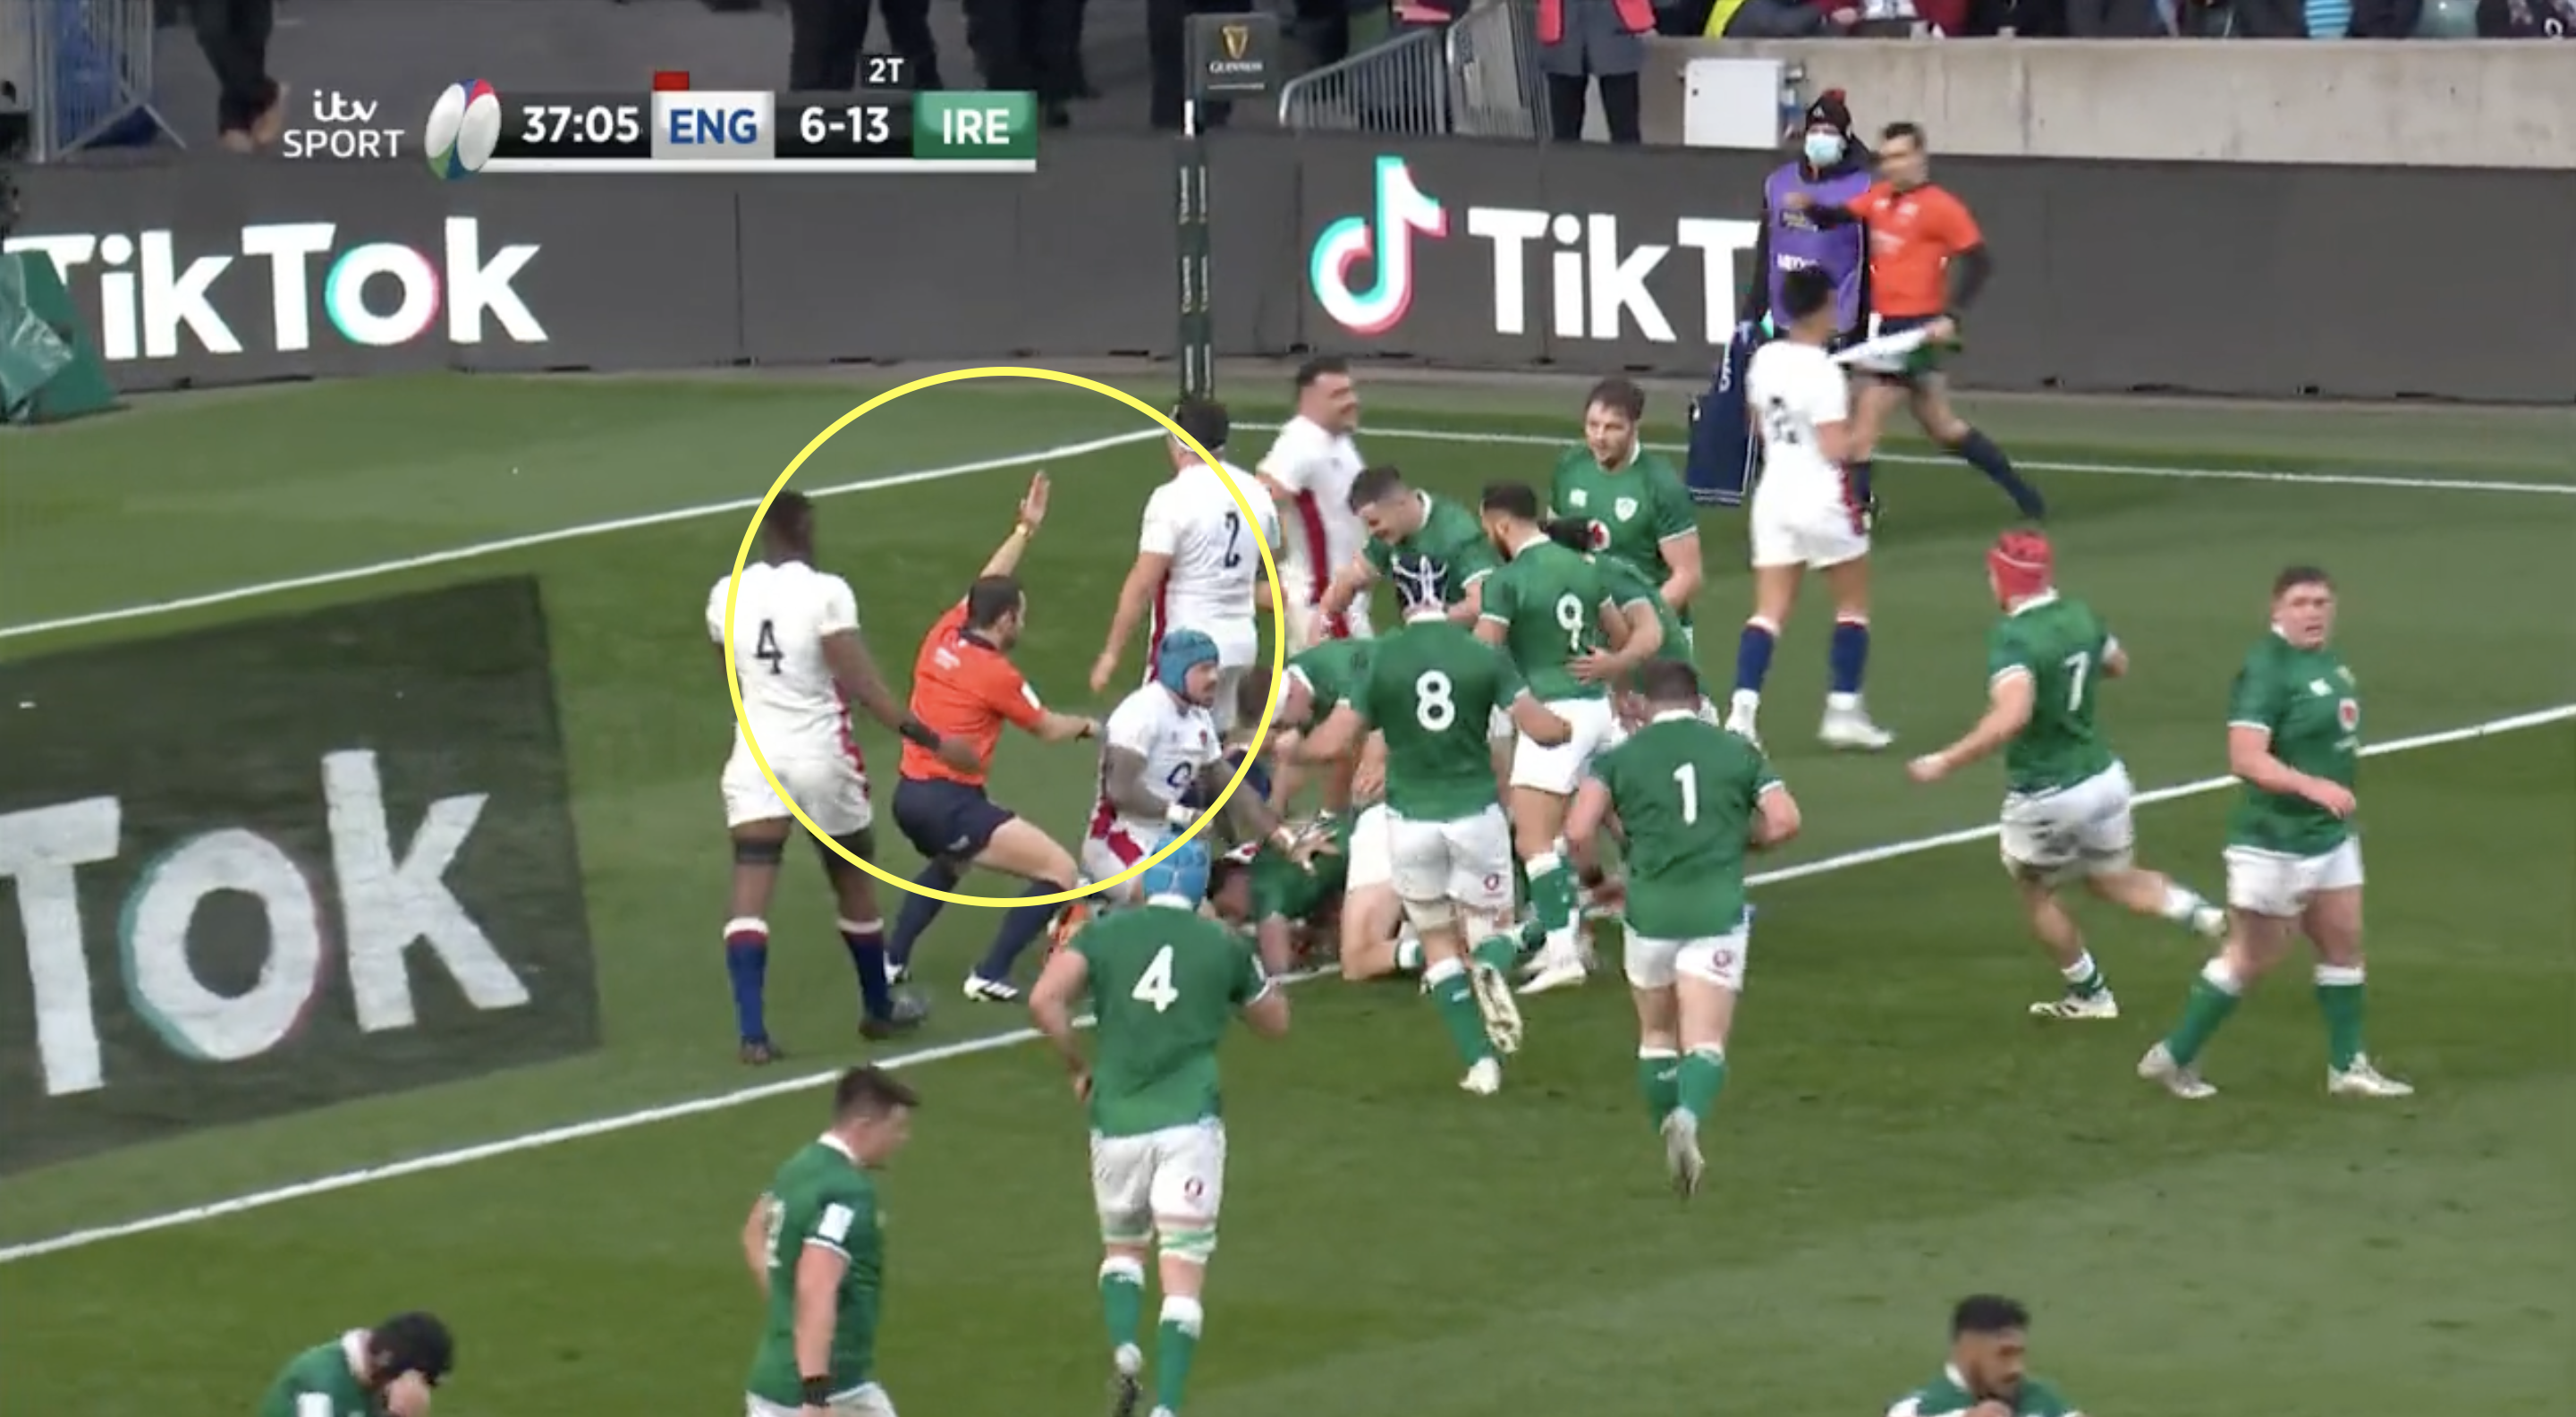 England fans insist Ireland's second try should not have counted